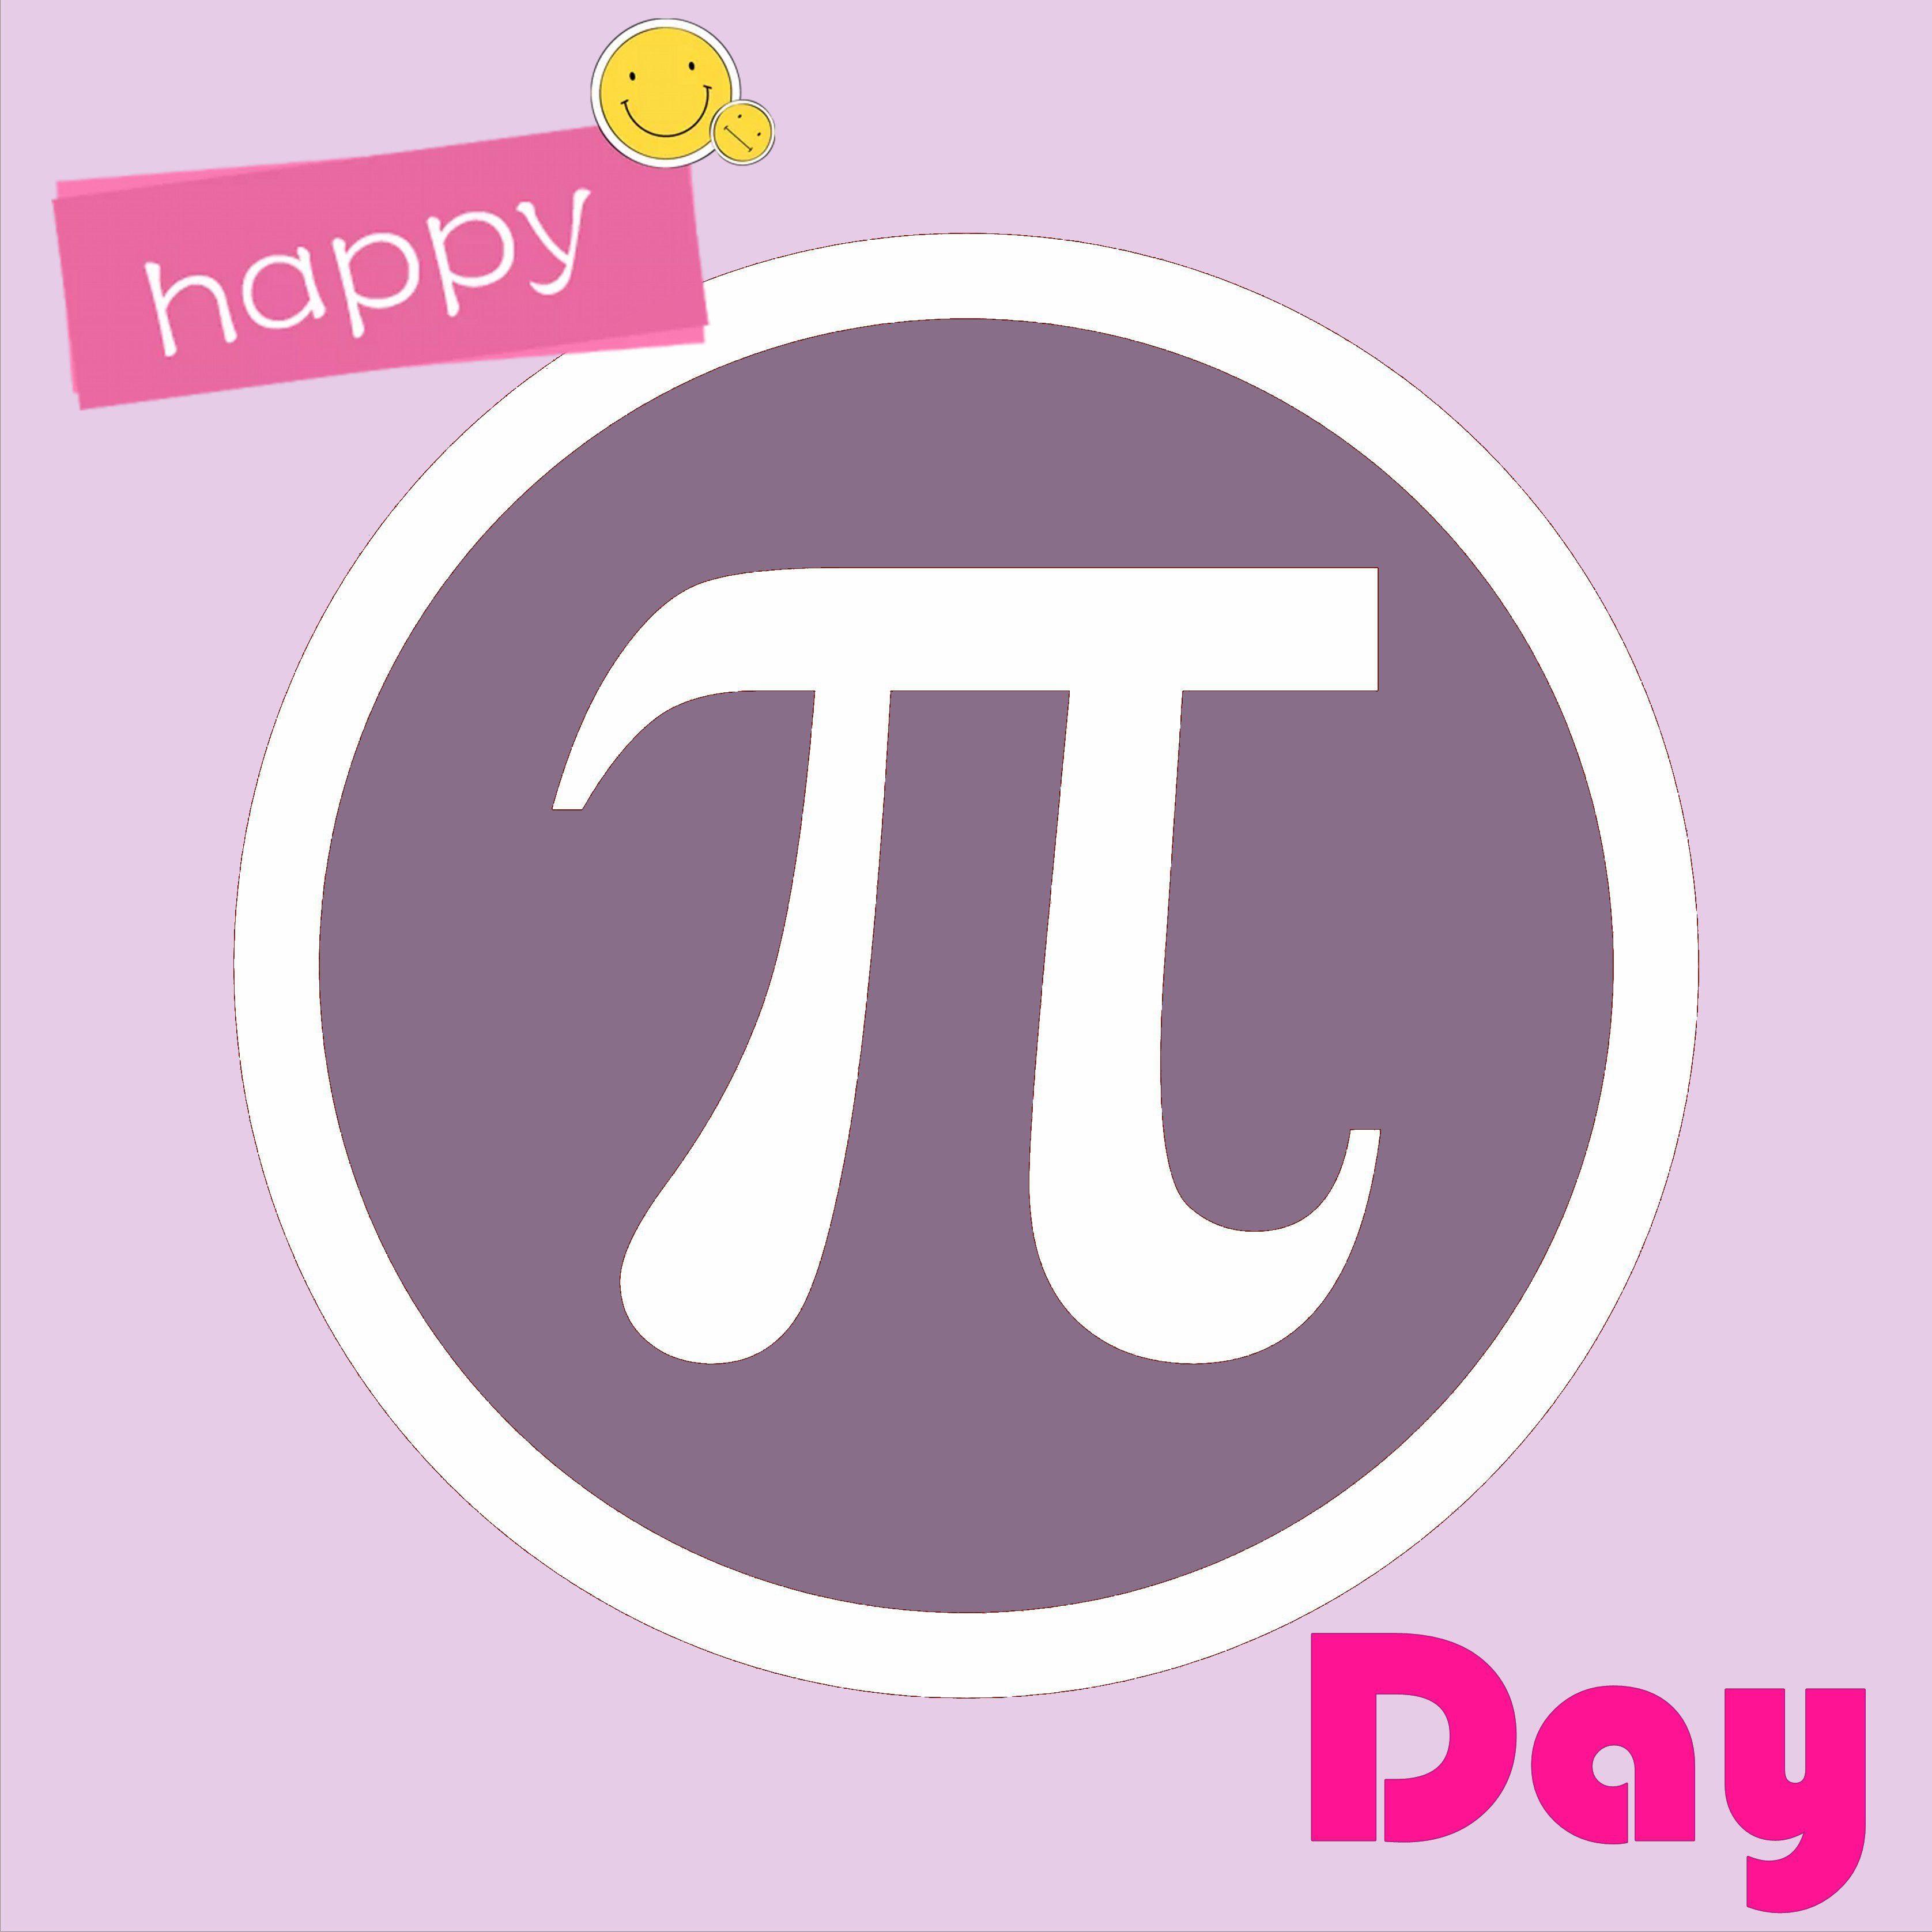 Pi Day Wishes Wallpaper